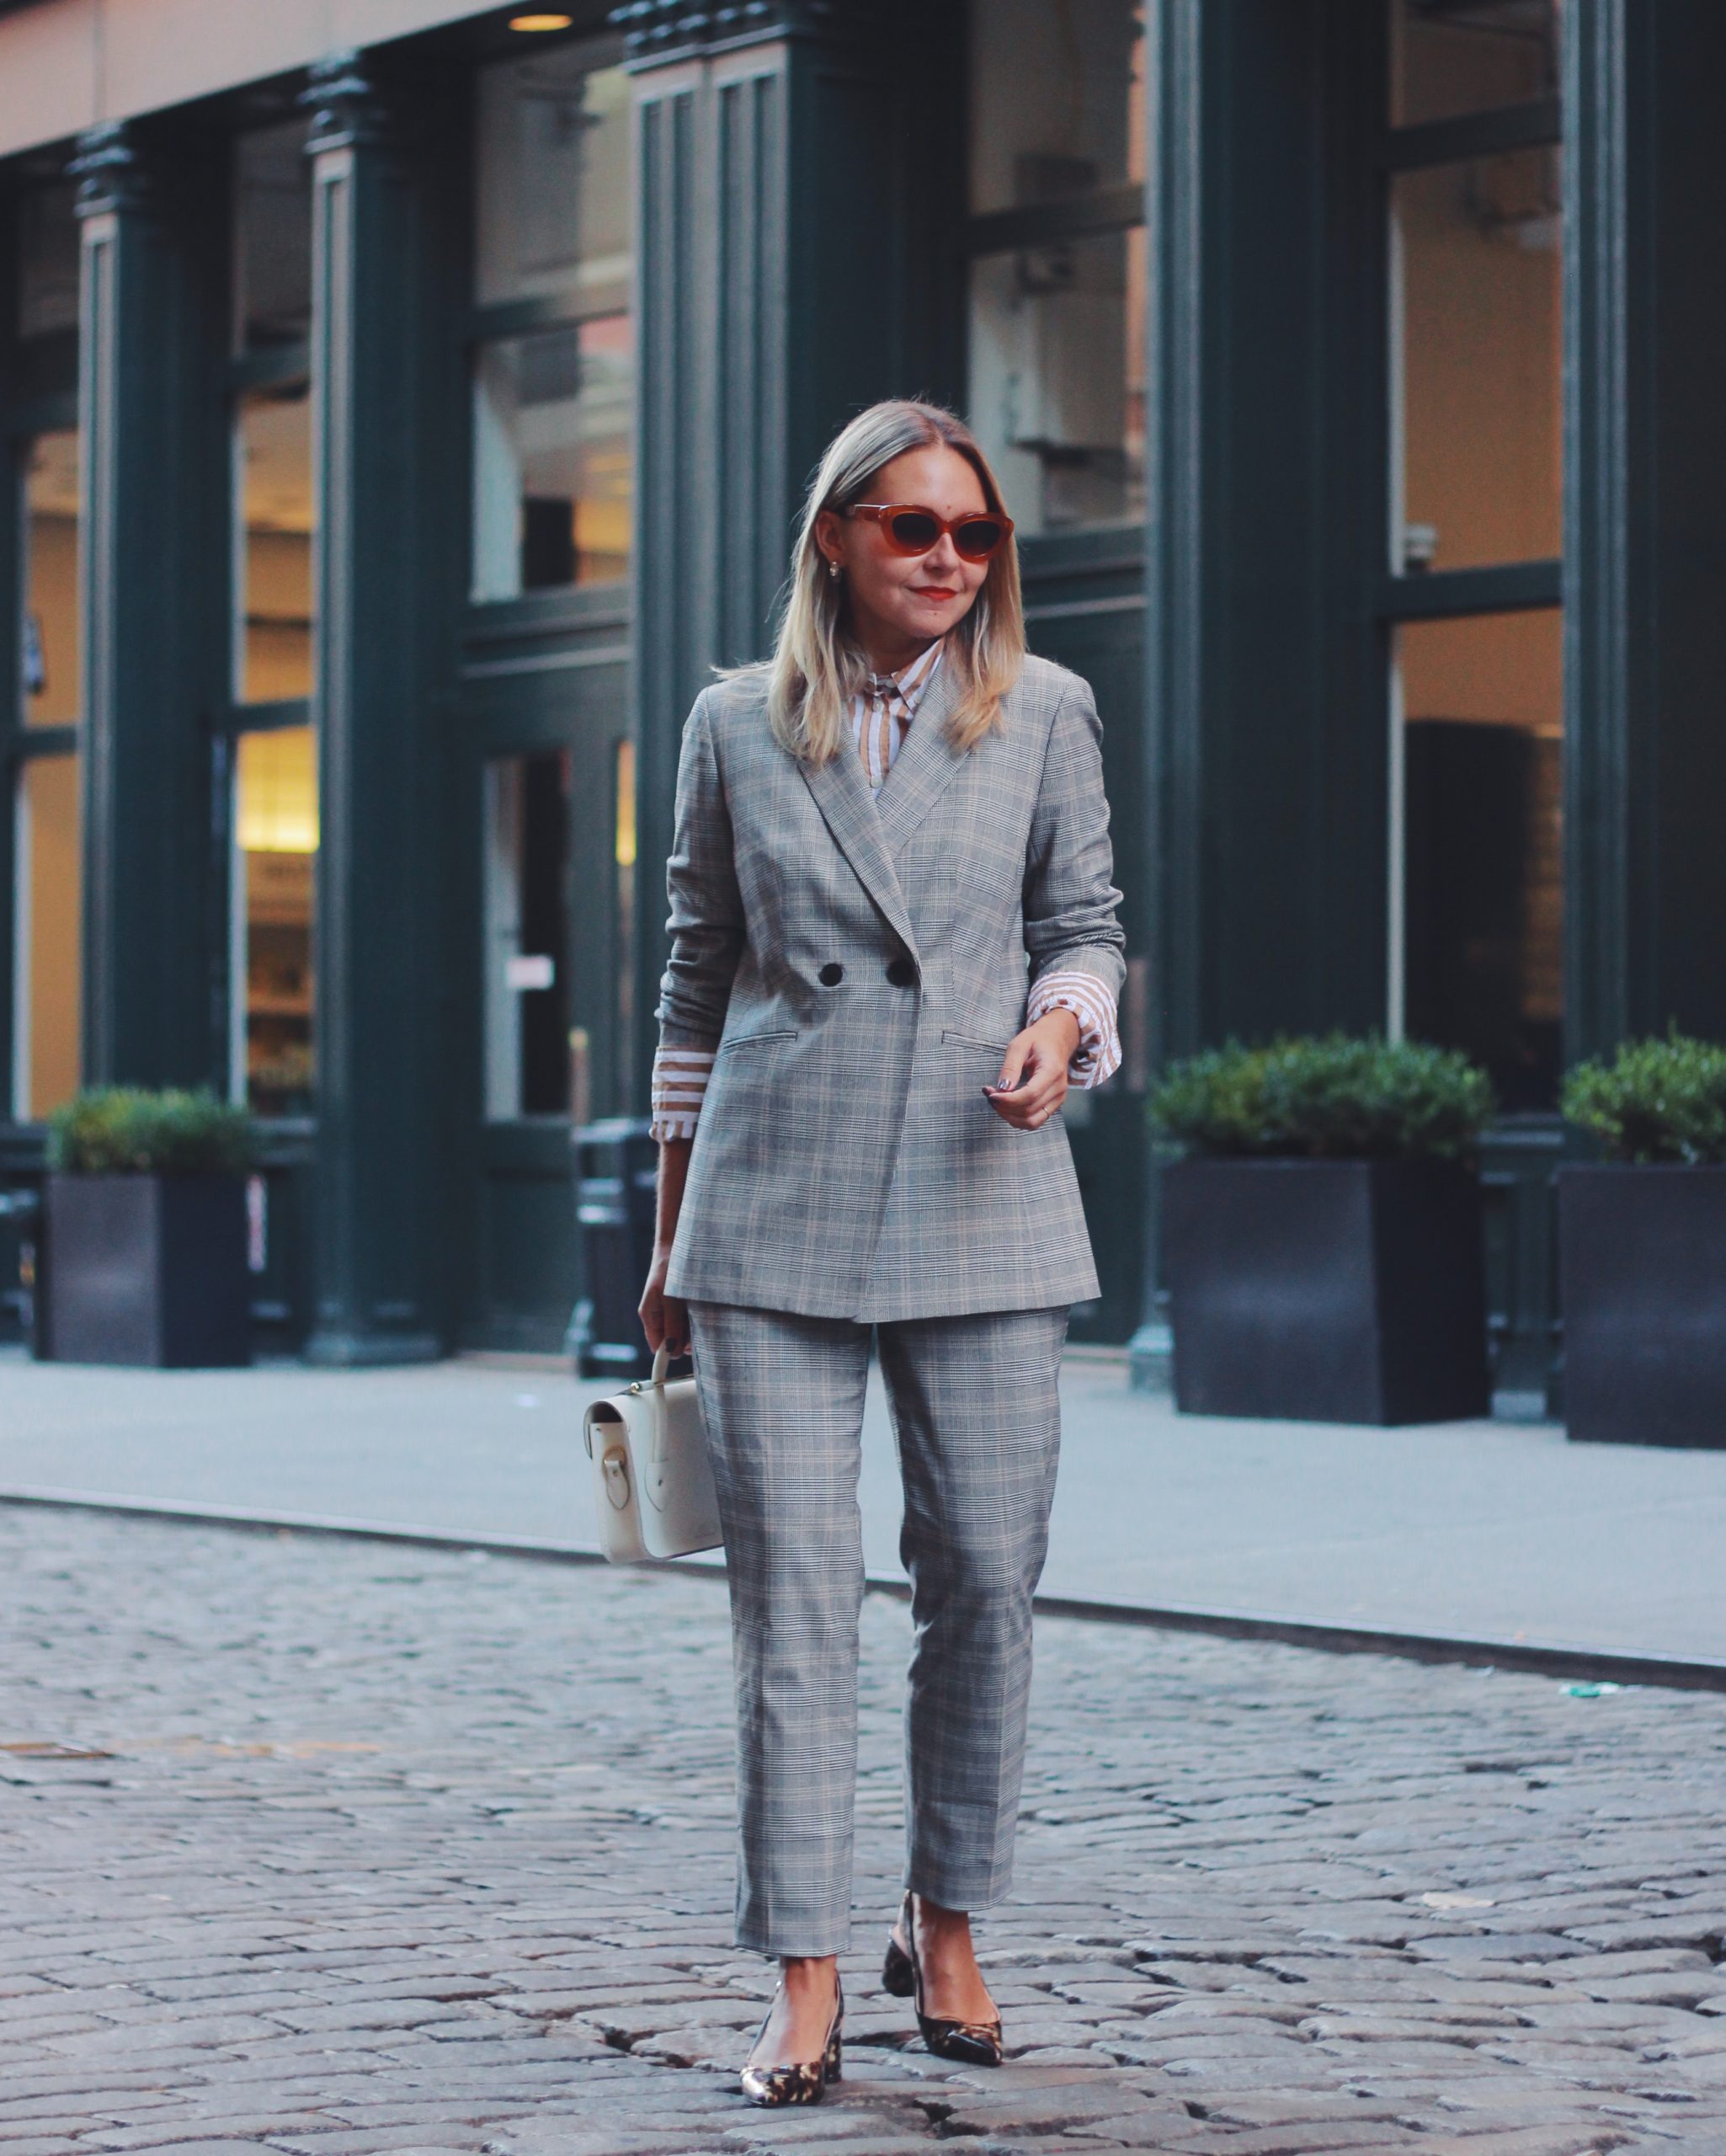 A HYBRID WARDROBE FOR WORK TO WEEKEND - The Steele Maiden